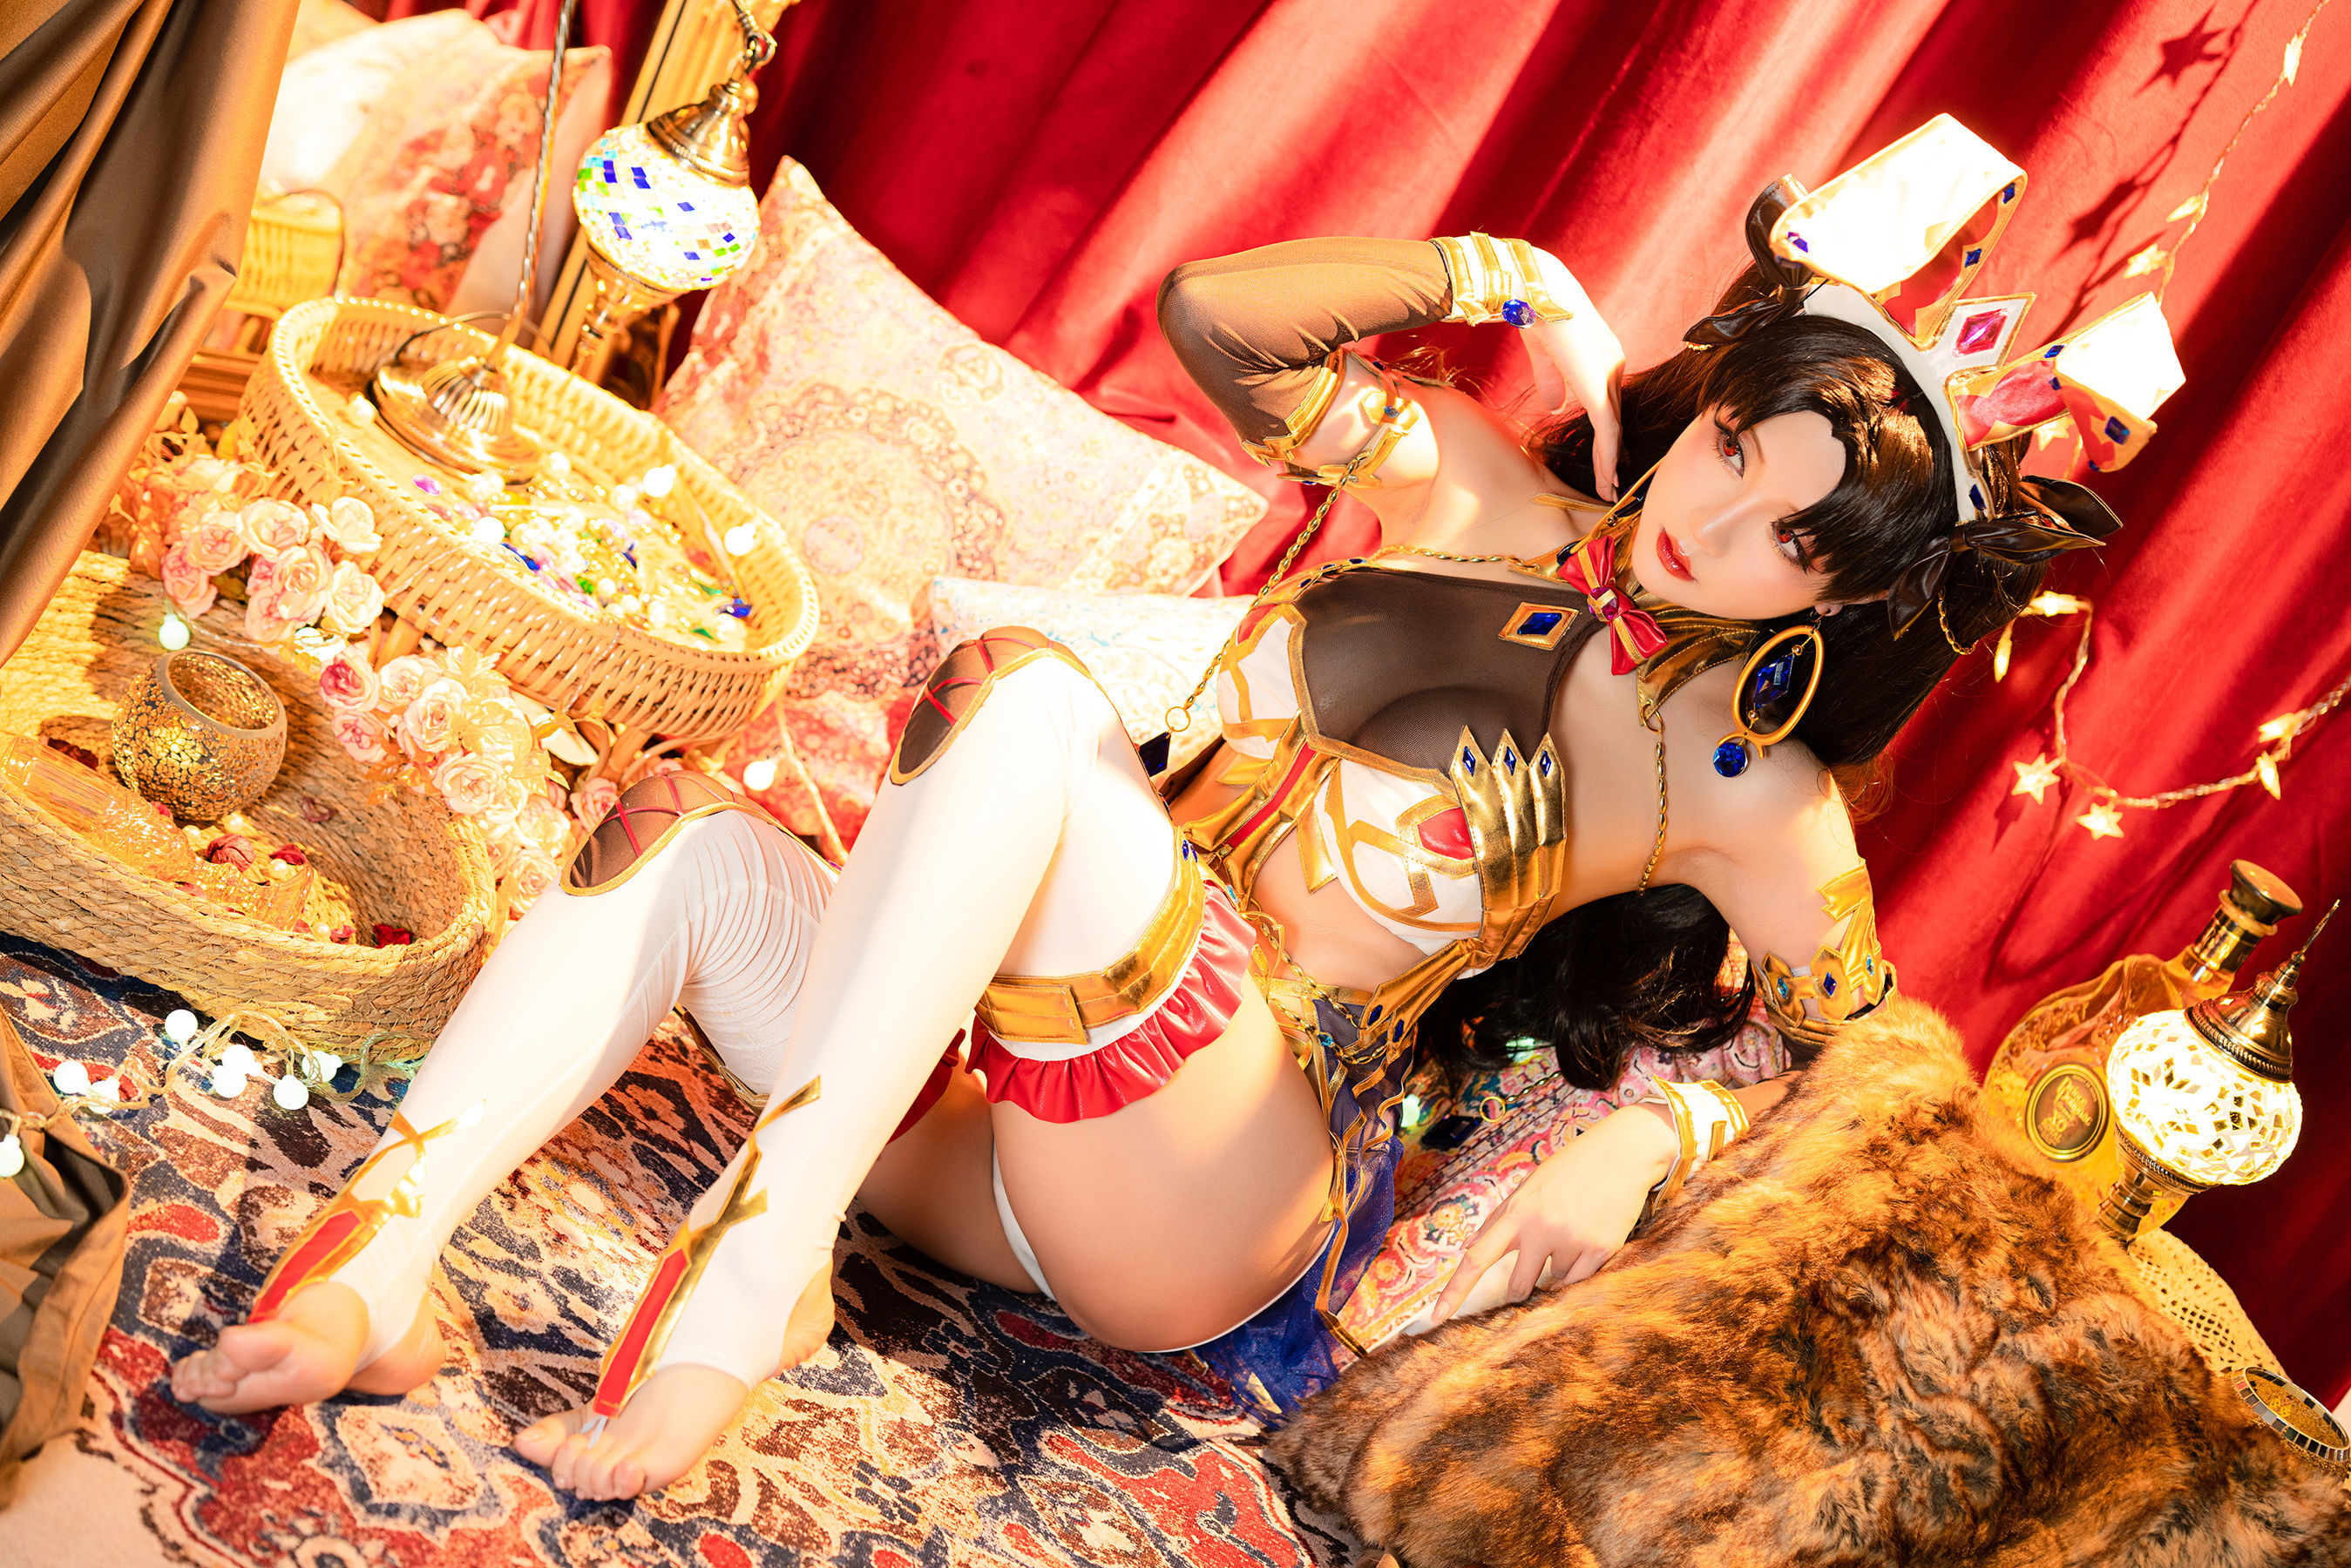 [Net Red COSER Photo] Miss Coser Star Chichi - Ishtar Colleague Istarin Page 24 No.ddce7e